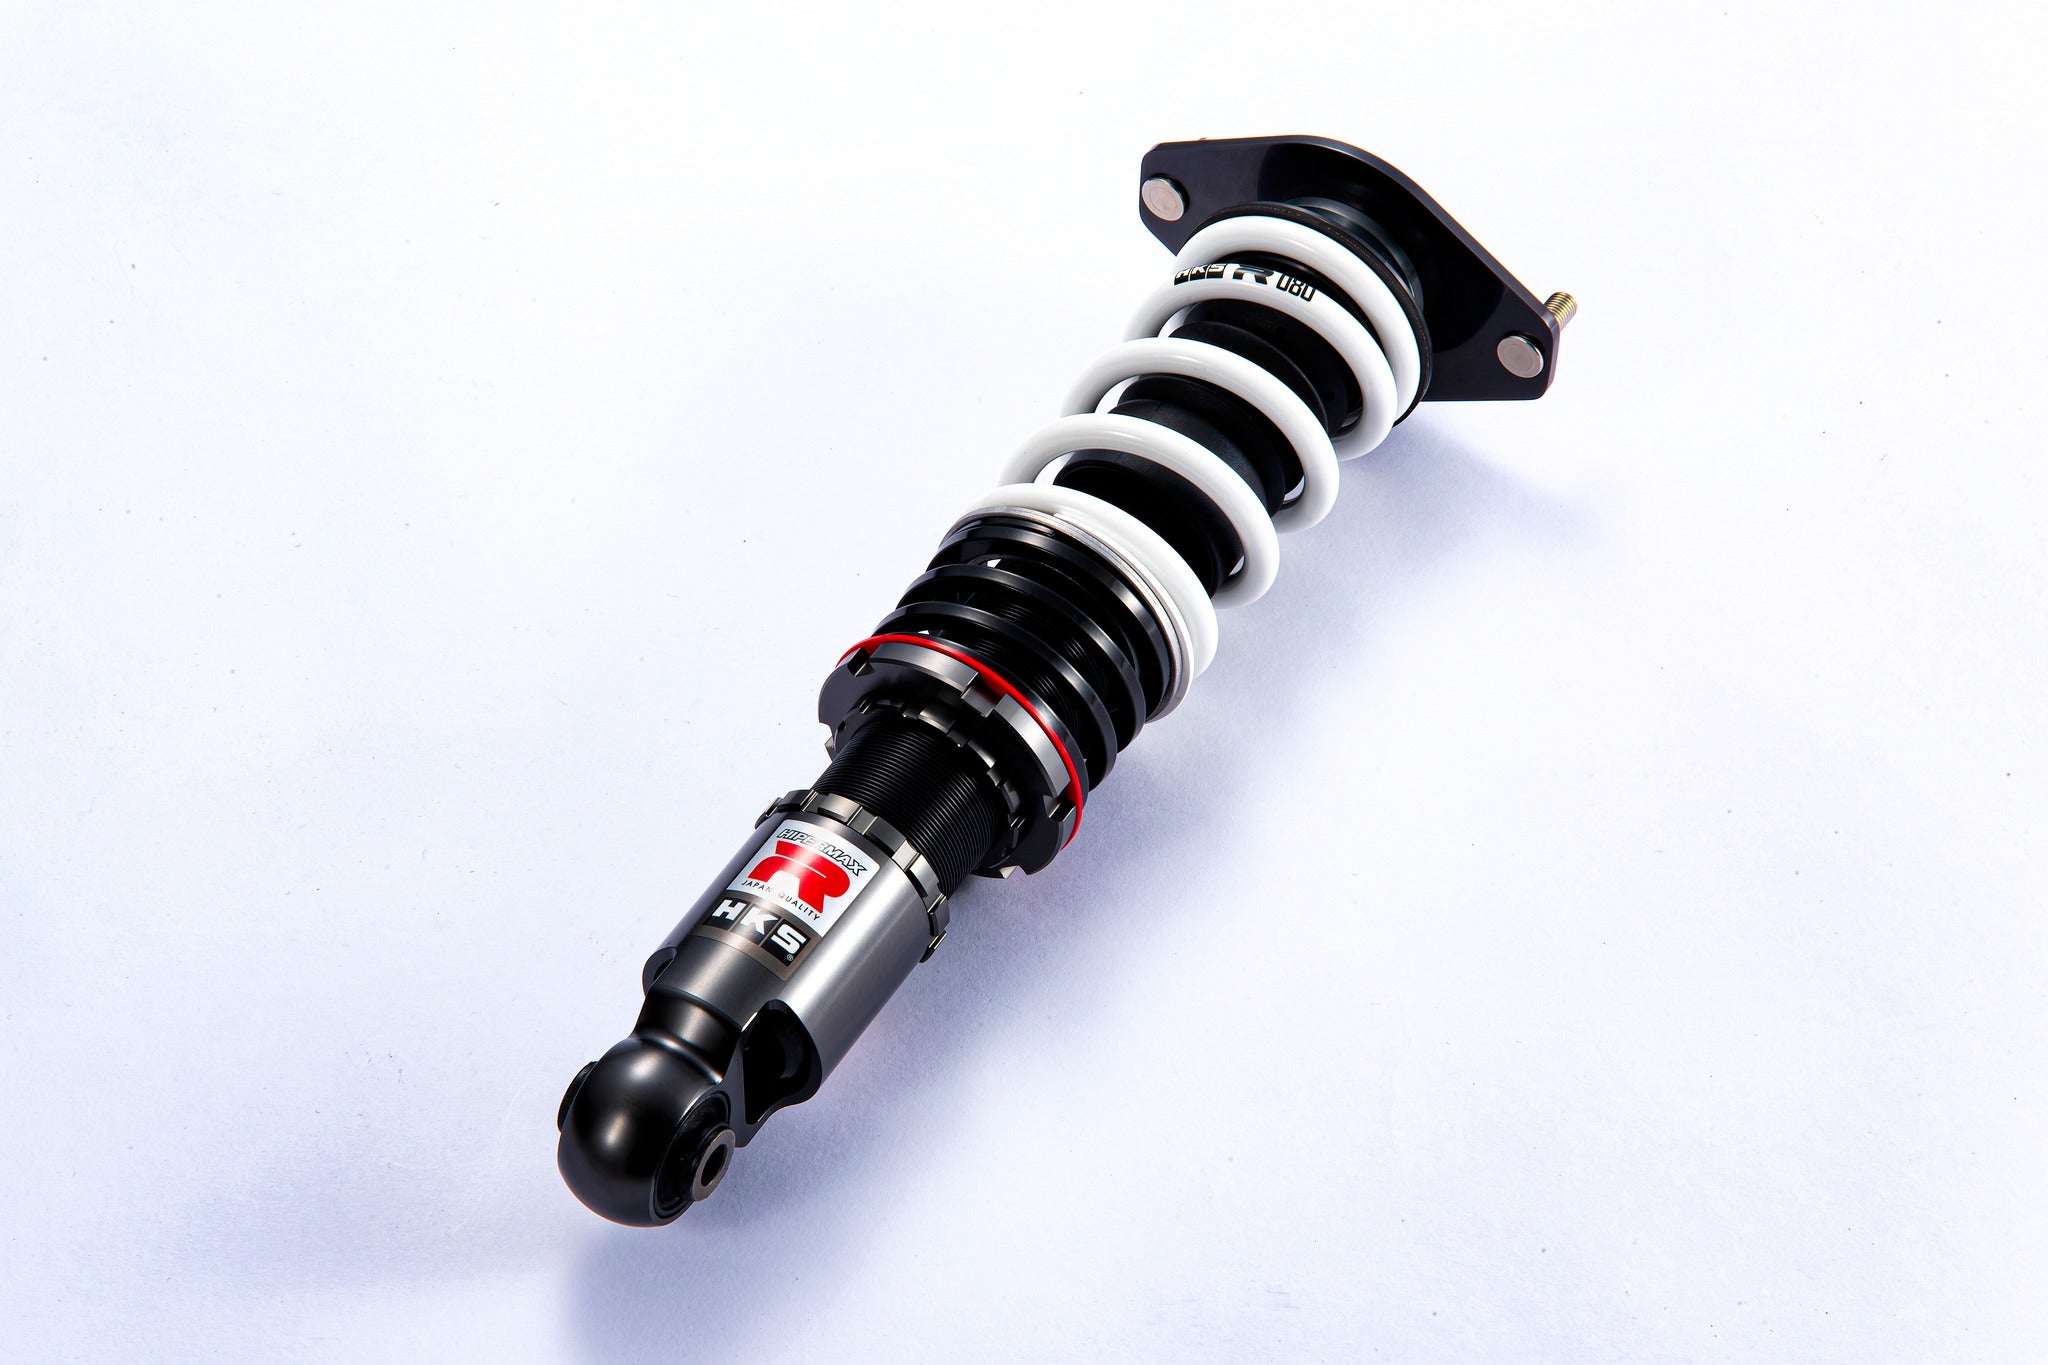 Legendary Tuning Company HKS Releases New Top-Tier HIPERMAX R Dampers